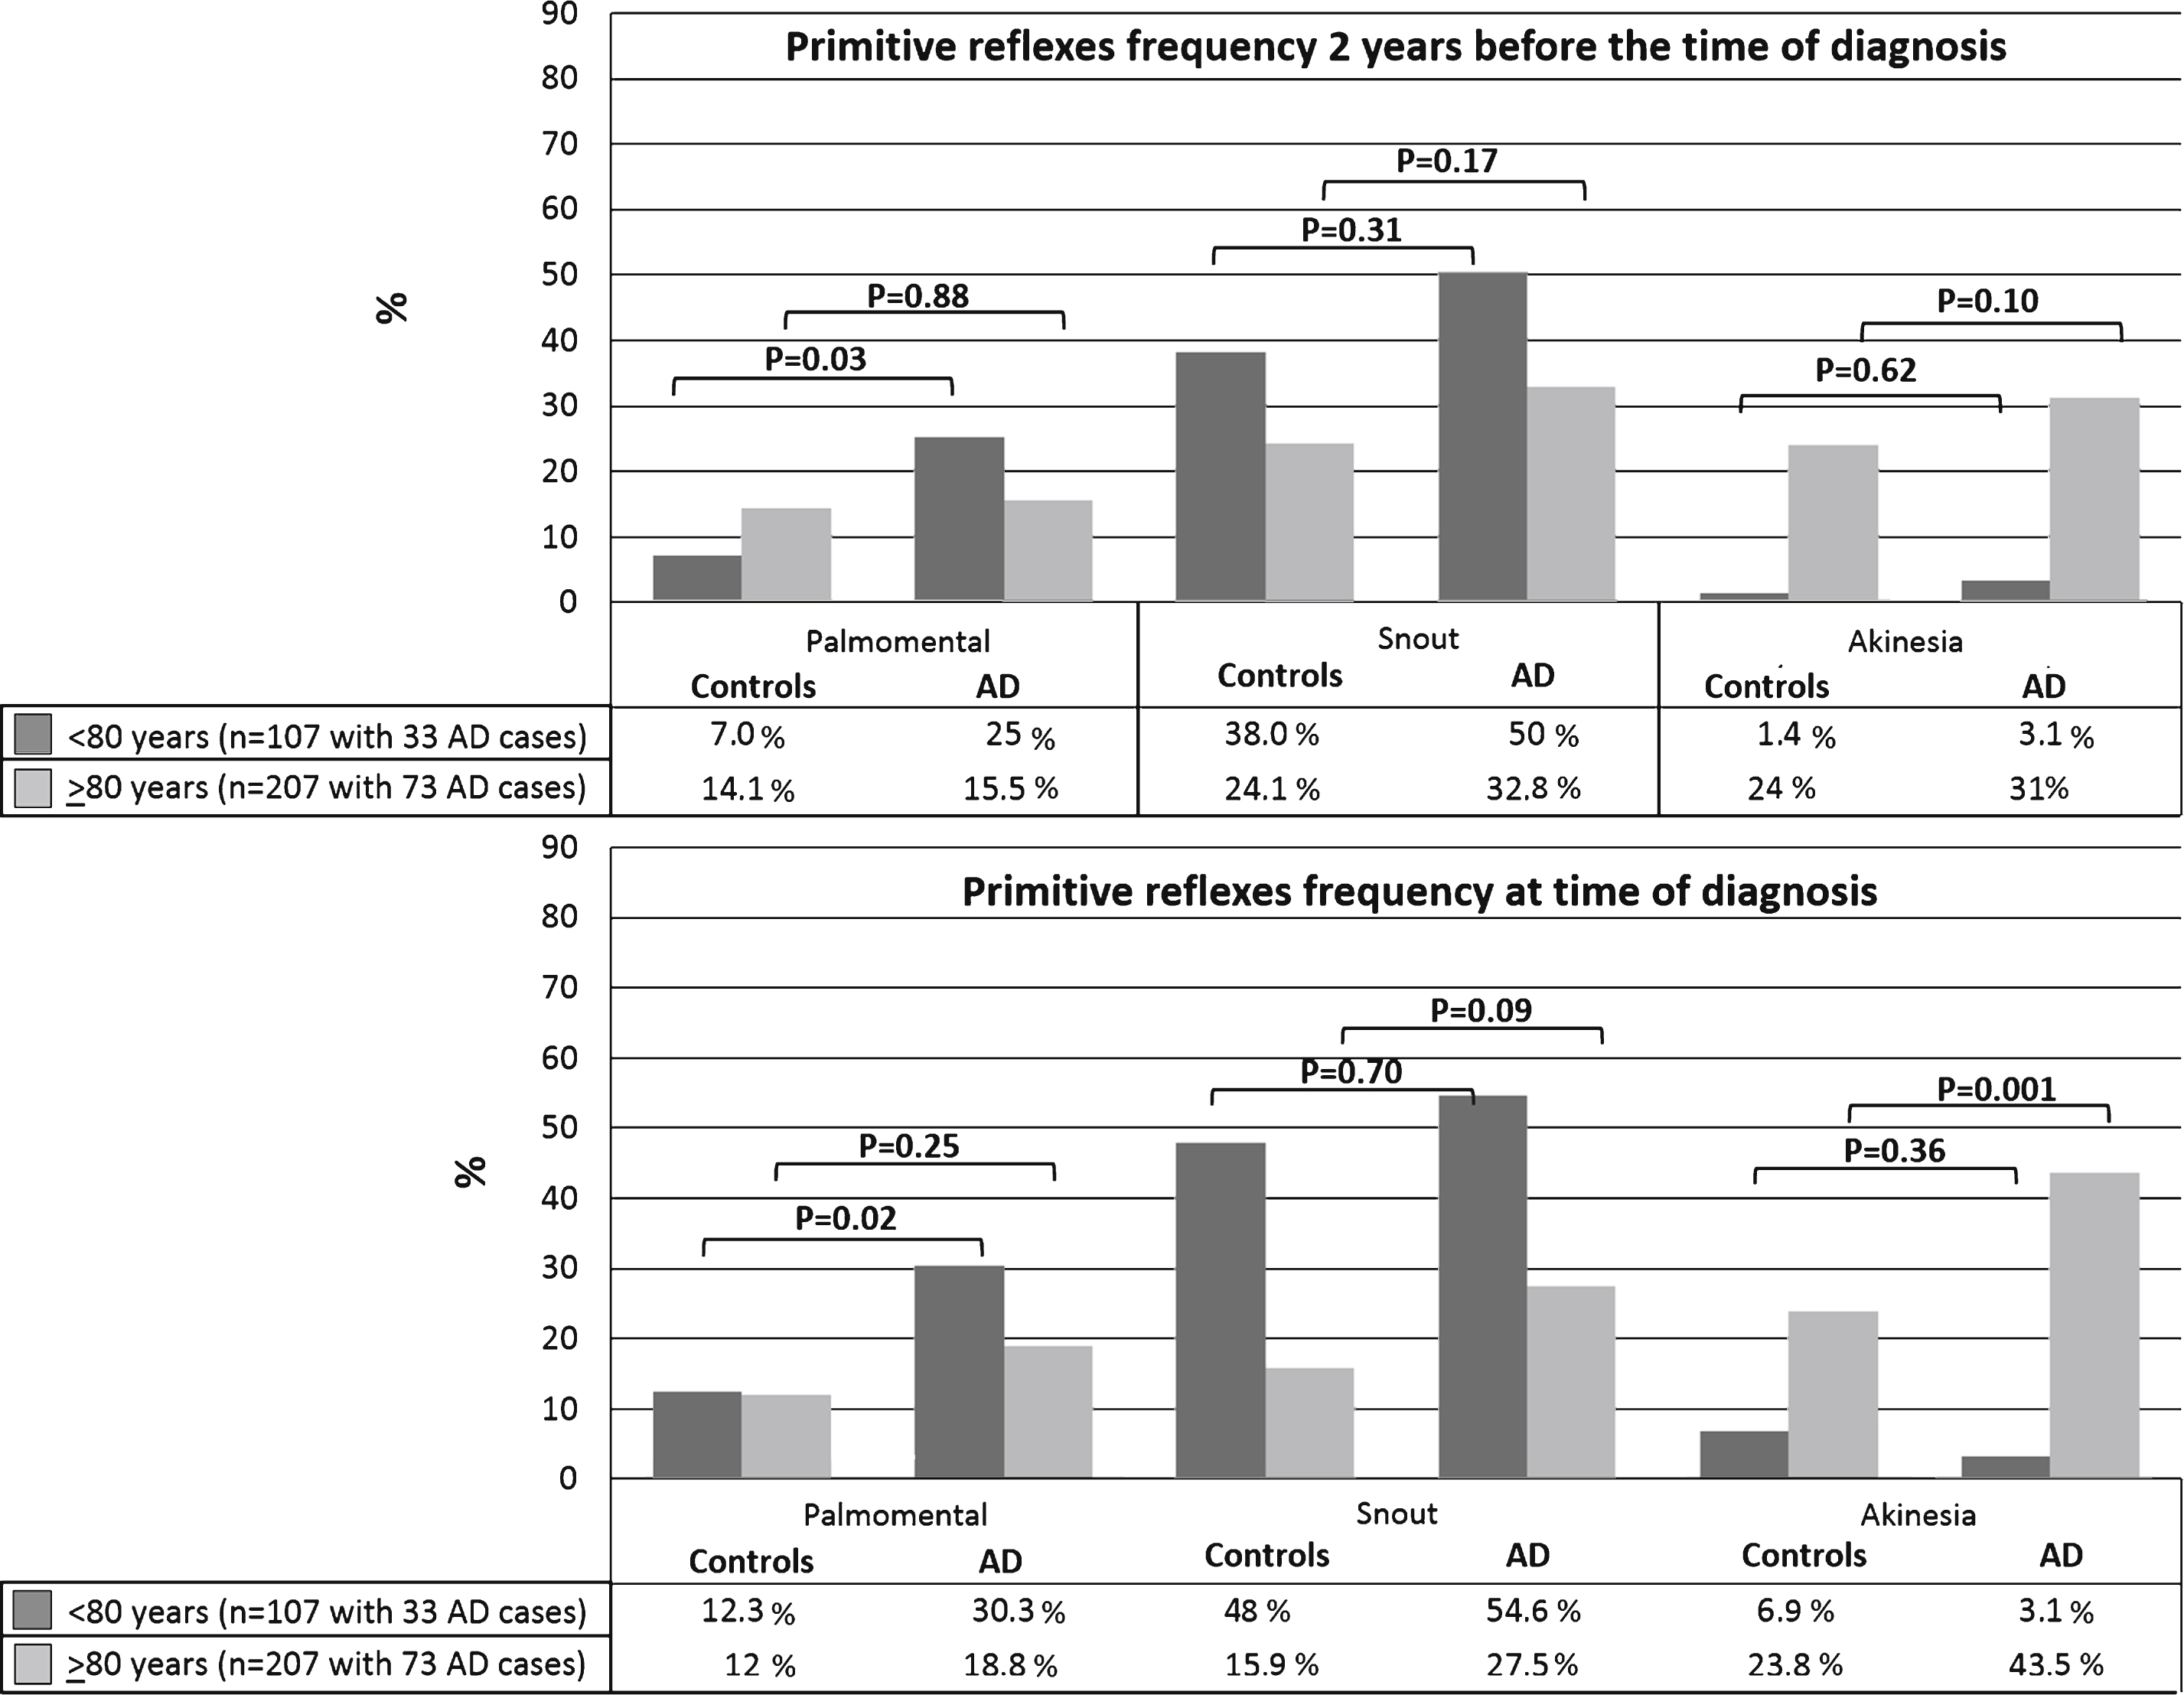 Effects of primitive reflexes (palmomental, snout) and akinesia clinical signs between 106 incident AD cases and 208 matched controls in two age groups (<or ≥80 years old) two years before or at time of AD diagnosis.